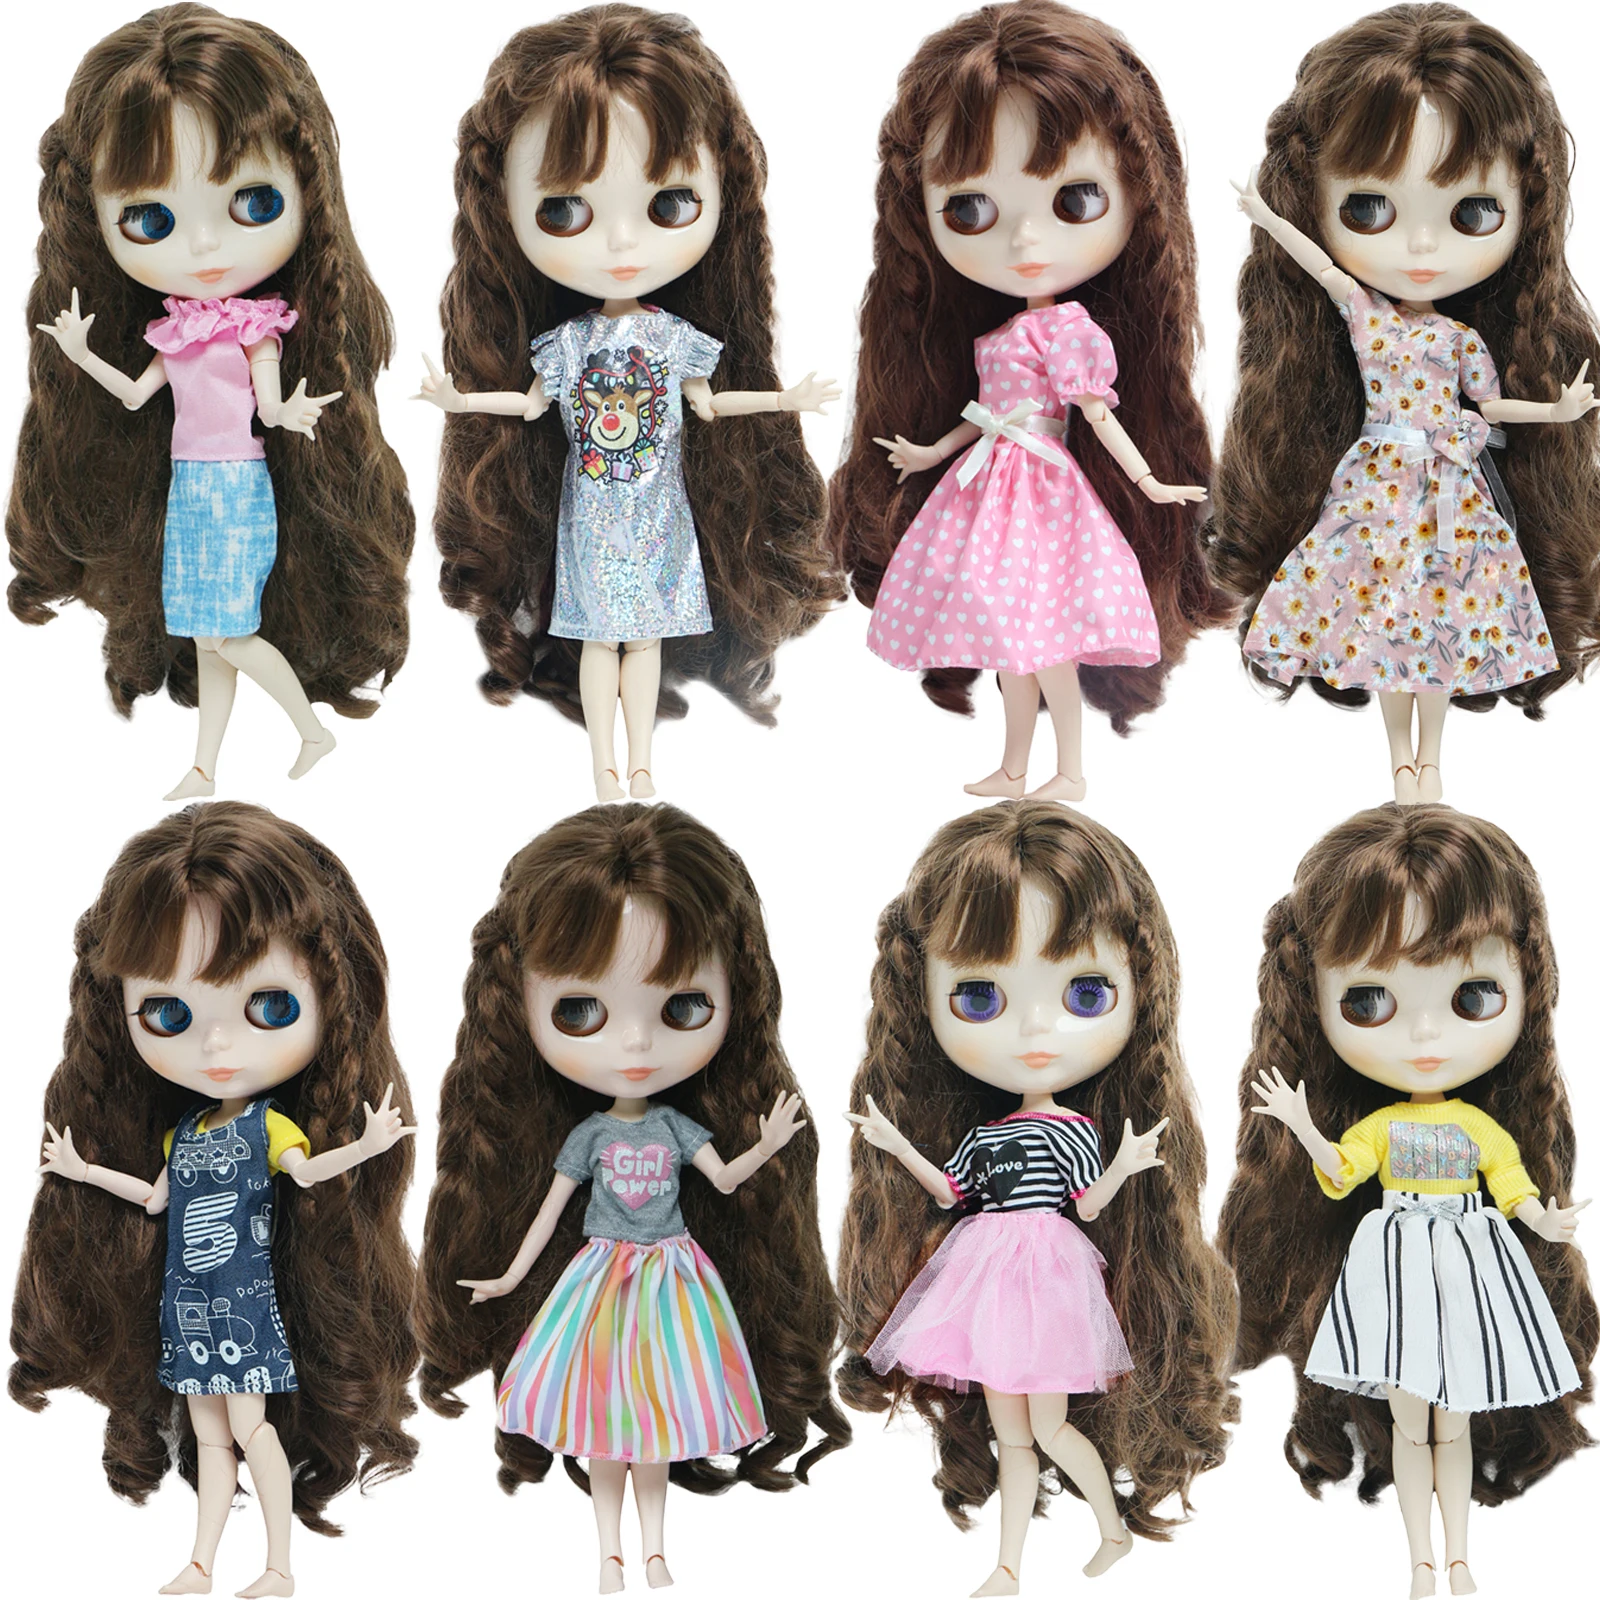 2pcs/set Cute Doll Clothes Suit 12inch Dolls Winter Casual Outfit for Blythe